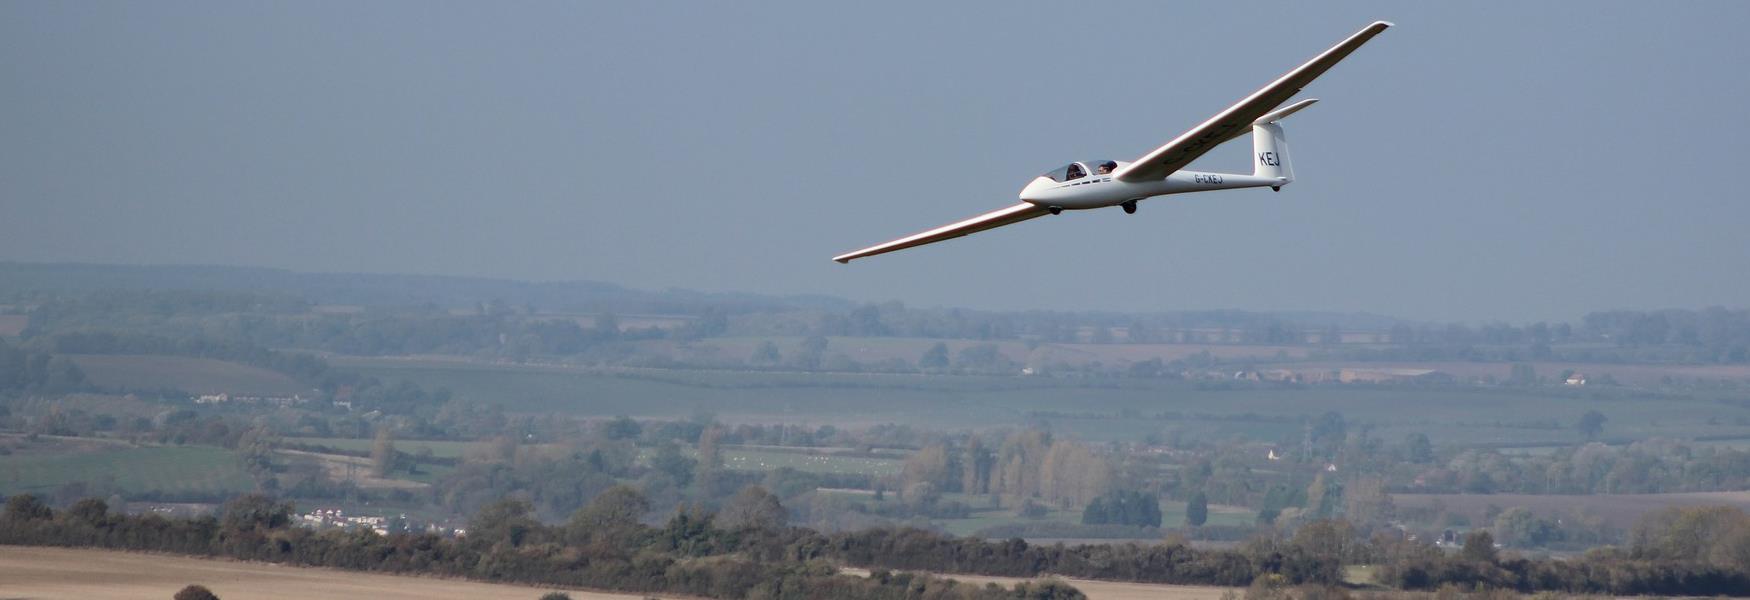 gliding over dunstable downs